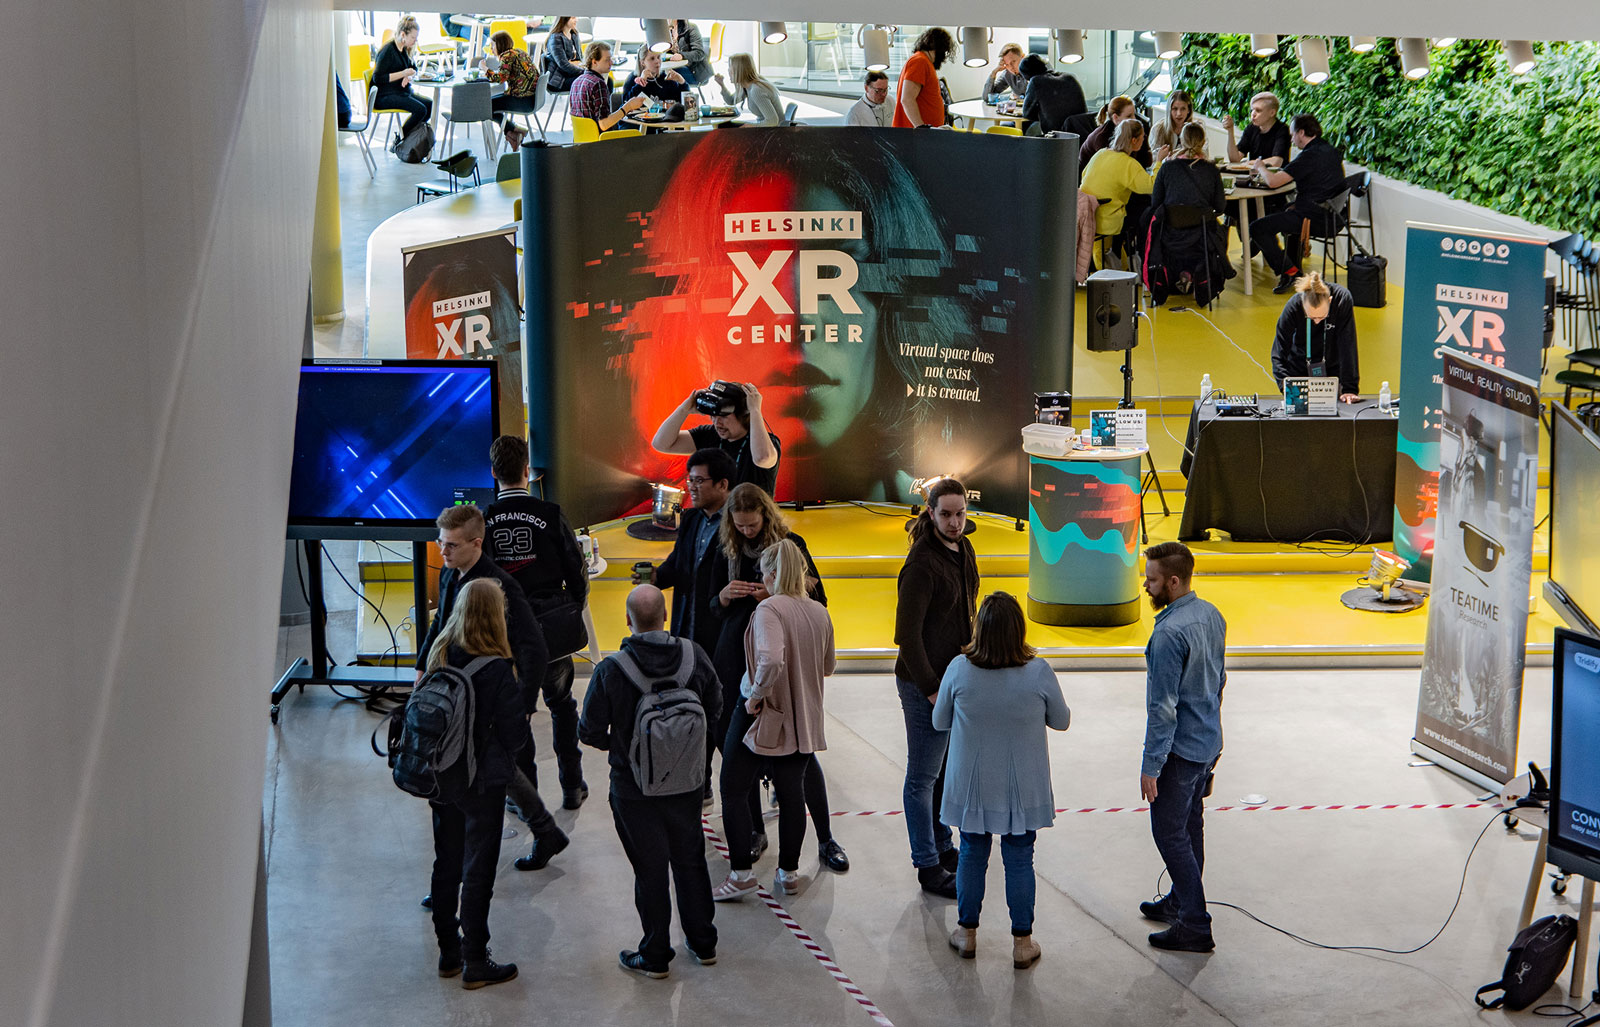 Helsinki XR Center's roadshow stand at Metropolia University of Applied Sciences' Myllypuro campus with a lot of interested people around the stand.